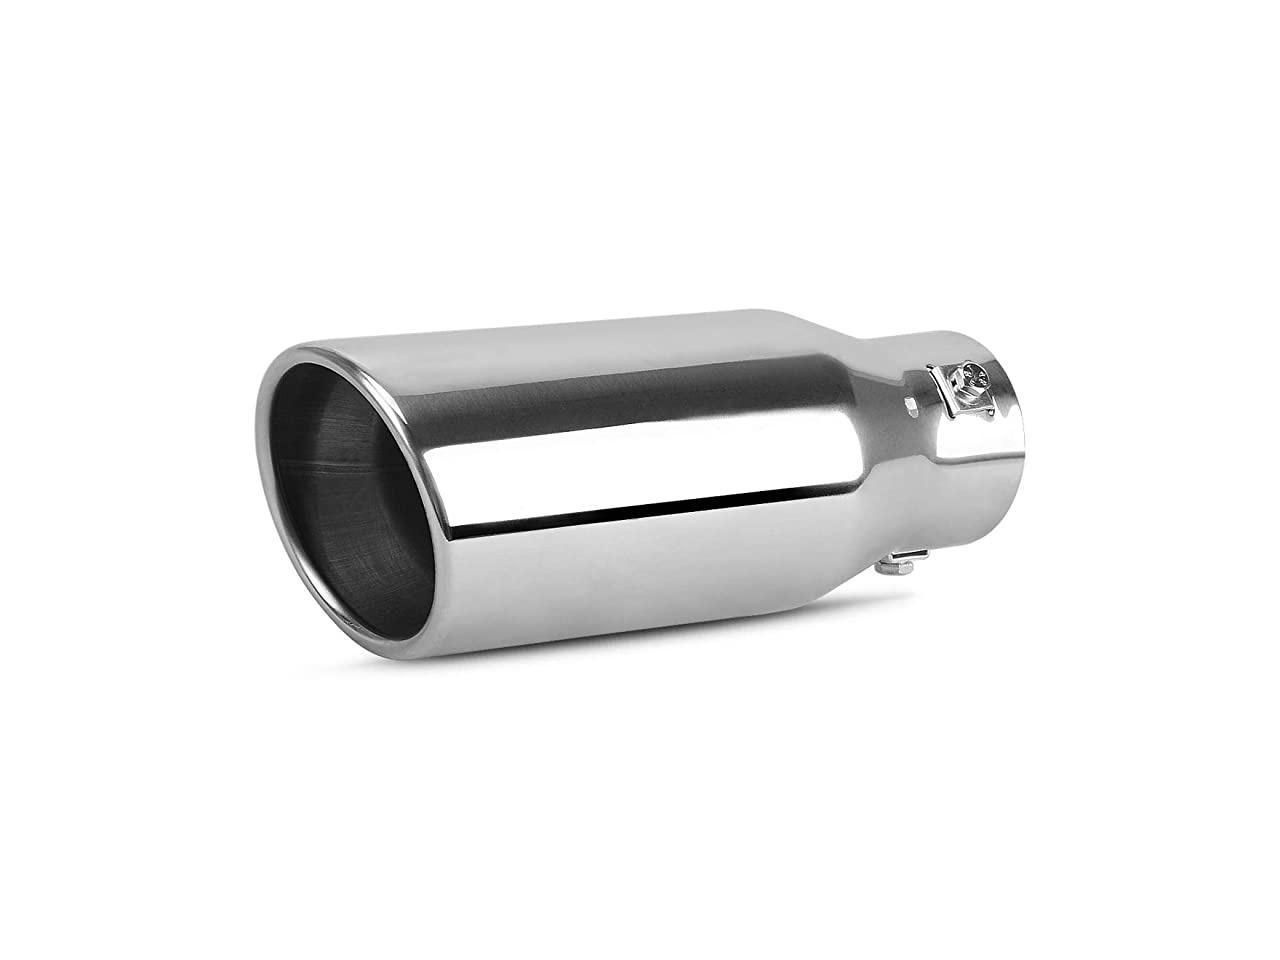 1.5-2.0 Inch Adjustable Inlet Exhaust Tip, Chrome-Plated Stainless